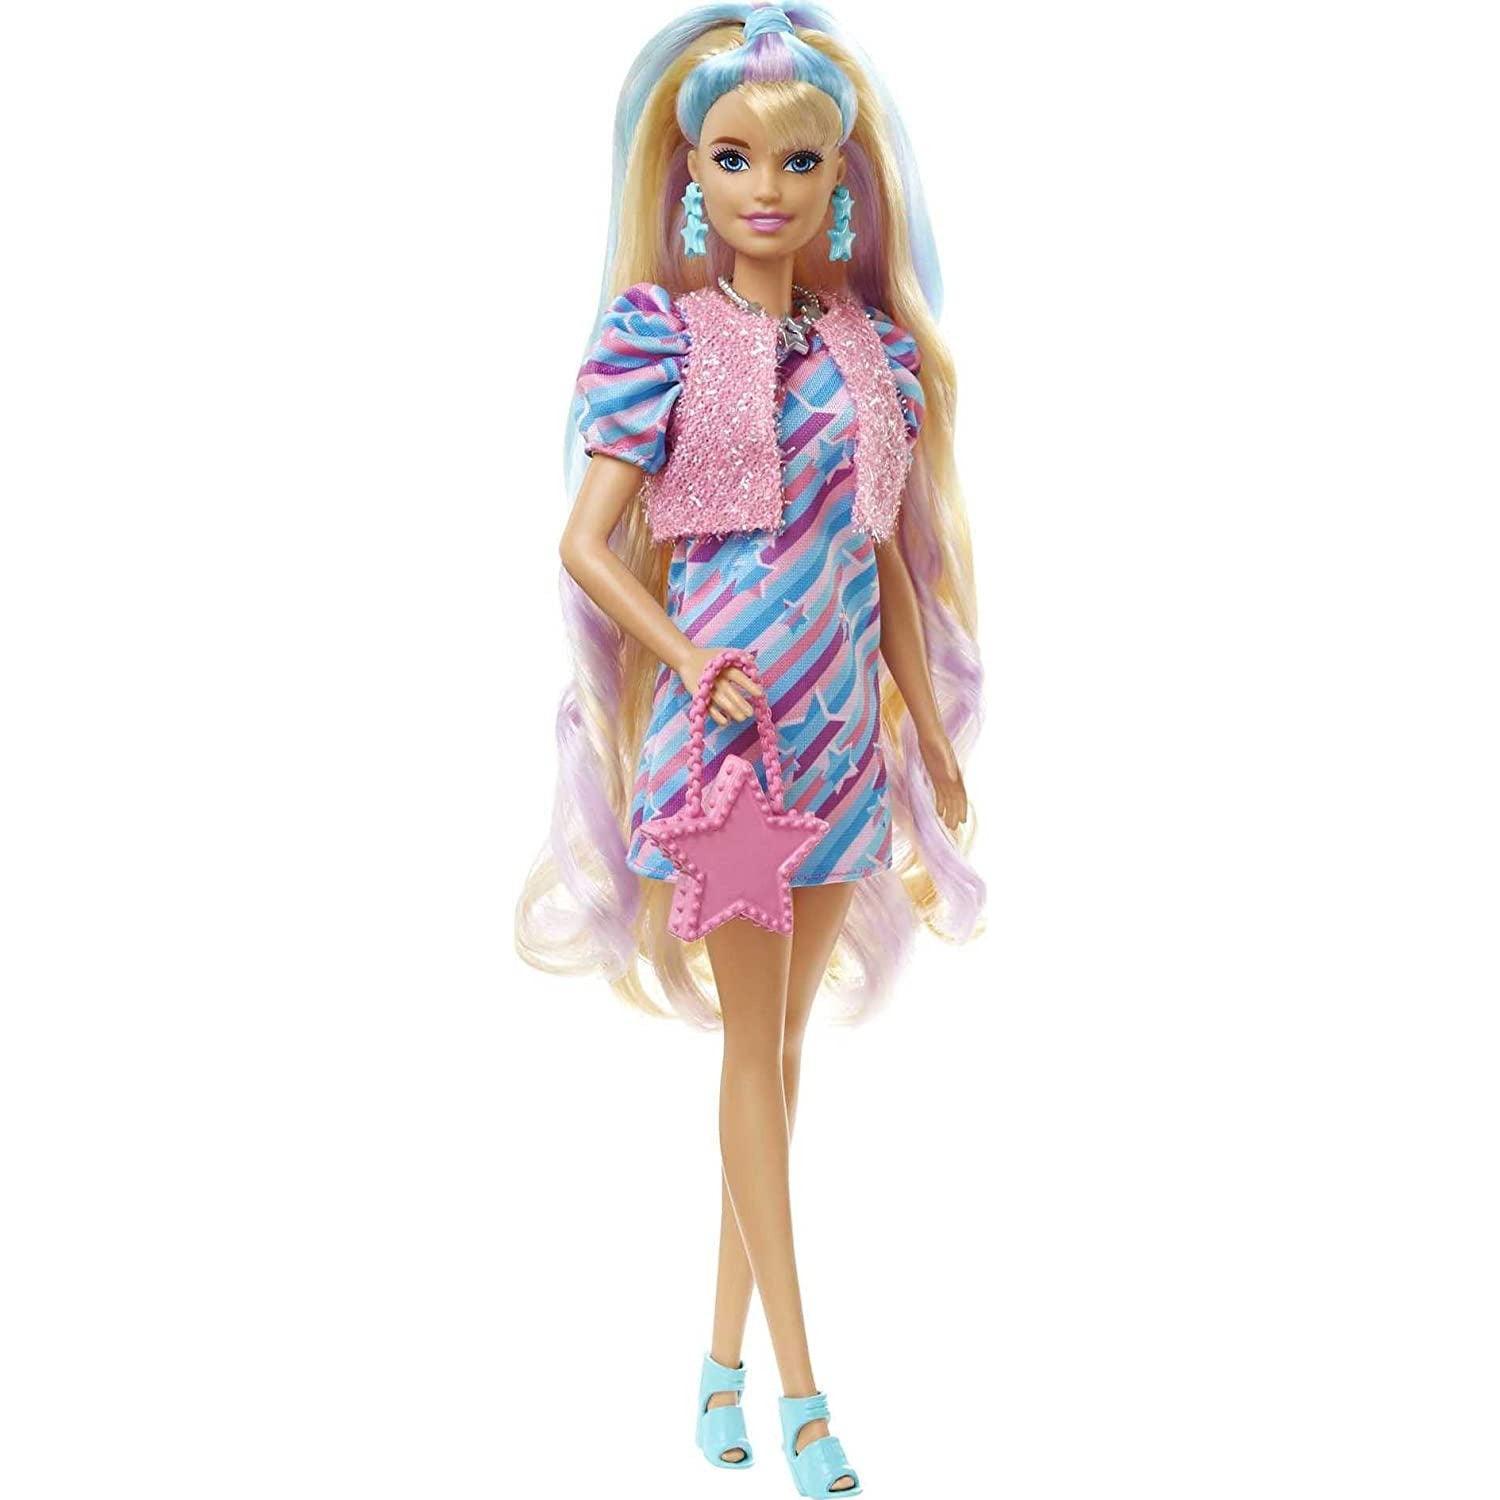 Barbie Totally Hair Star-Themed Doll, 8.5 inch Fantasy Hair, Dress, 15 Hair & Fashion Play Accessories (8 with Color Change Feature) - BumbleToys - 2-4 Years, 3+ years, 4+ Years, 5-7 Years, Barbie, Dolls, Fashion Dolls & Accessories, Girls, Pre-Order